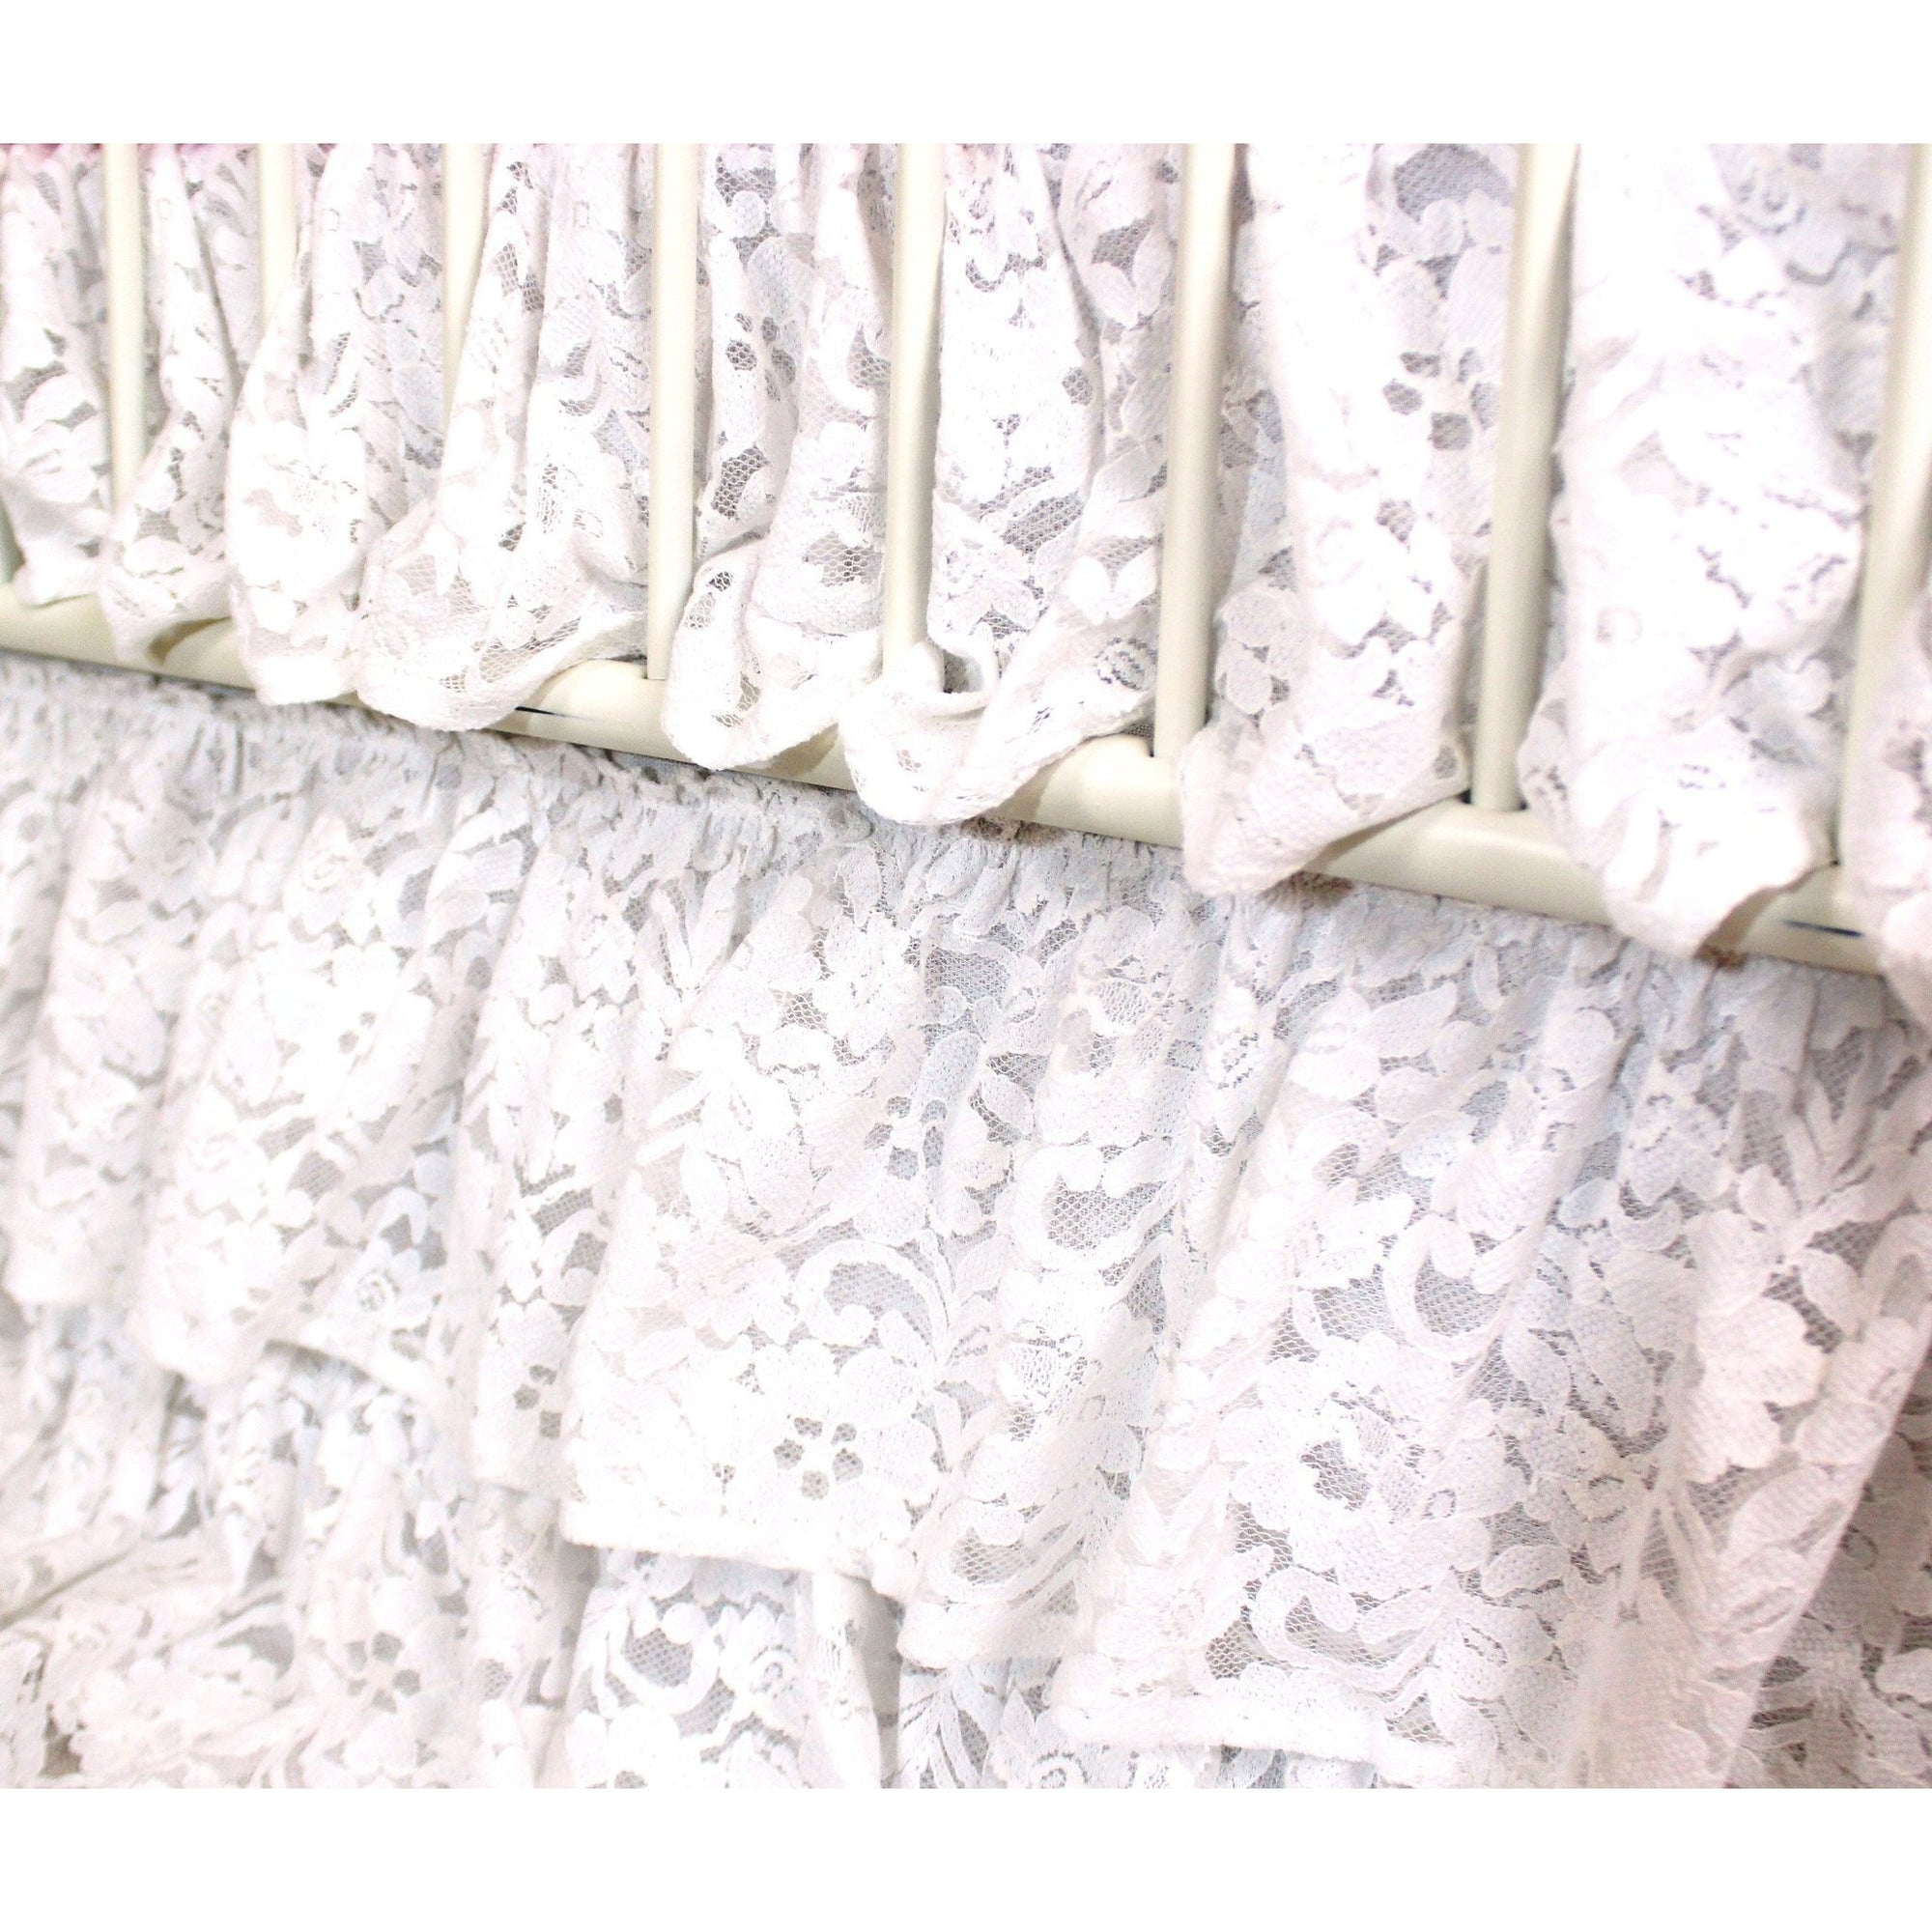 Waterfall Ruffle 3 Tier Crib Skirt | Vintage Lace White-Crib Skirt-Default-Jack and Jill Boutique